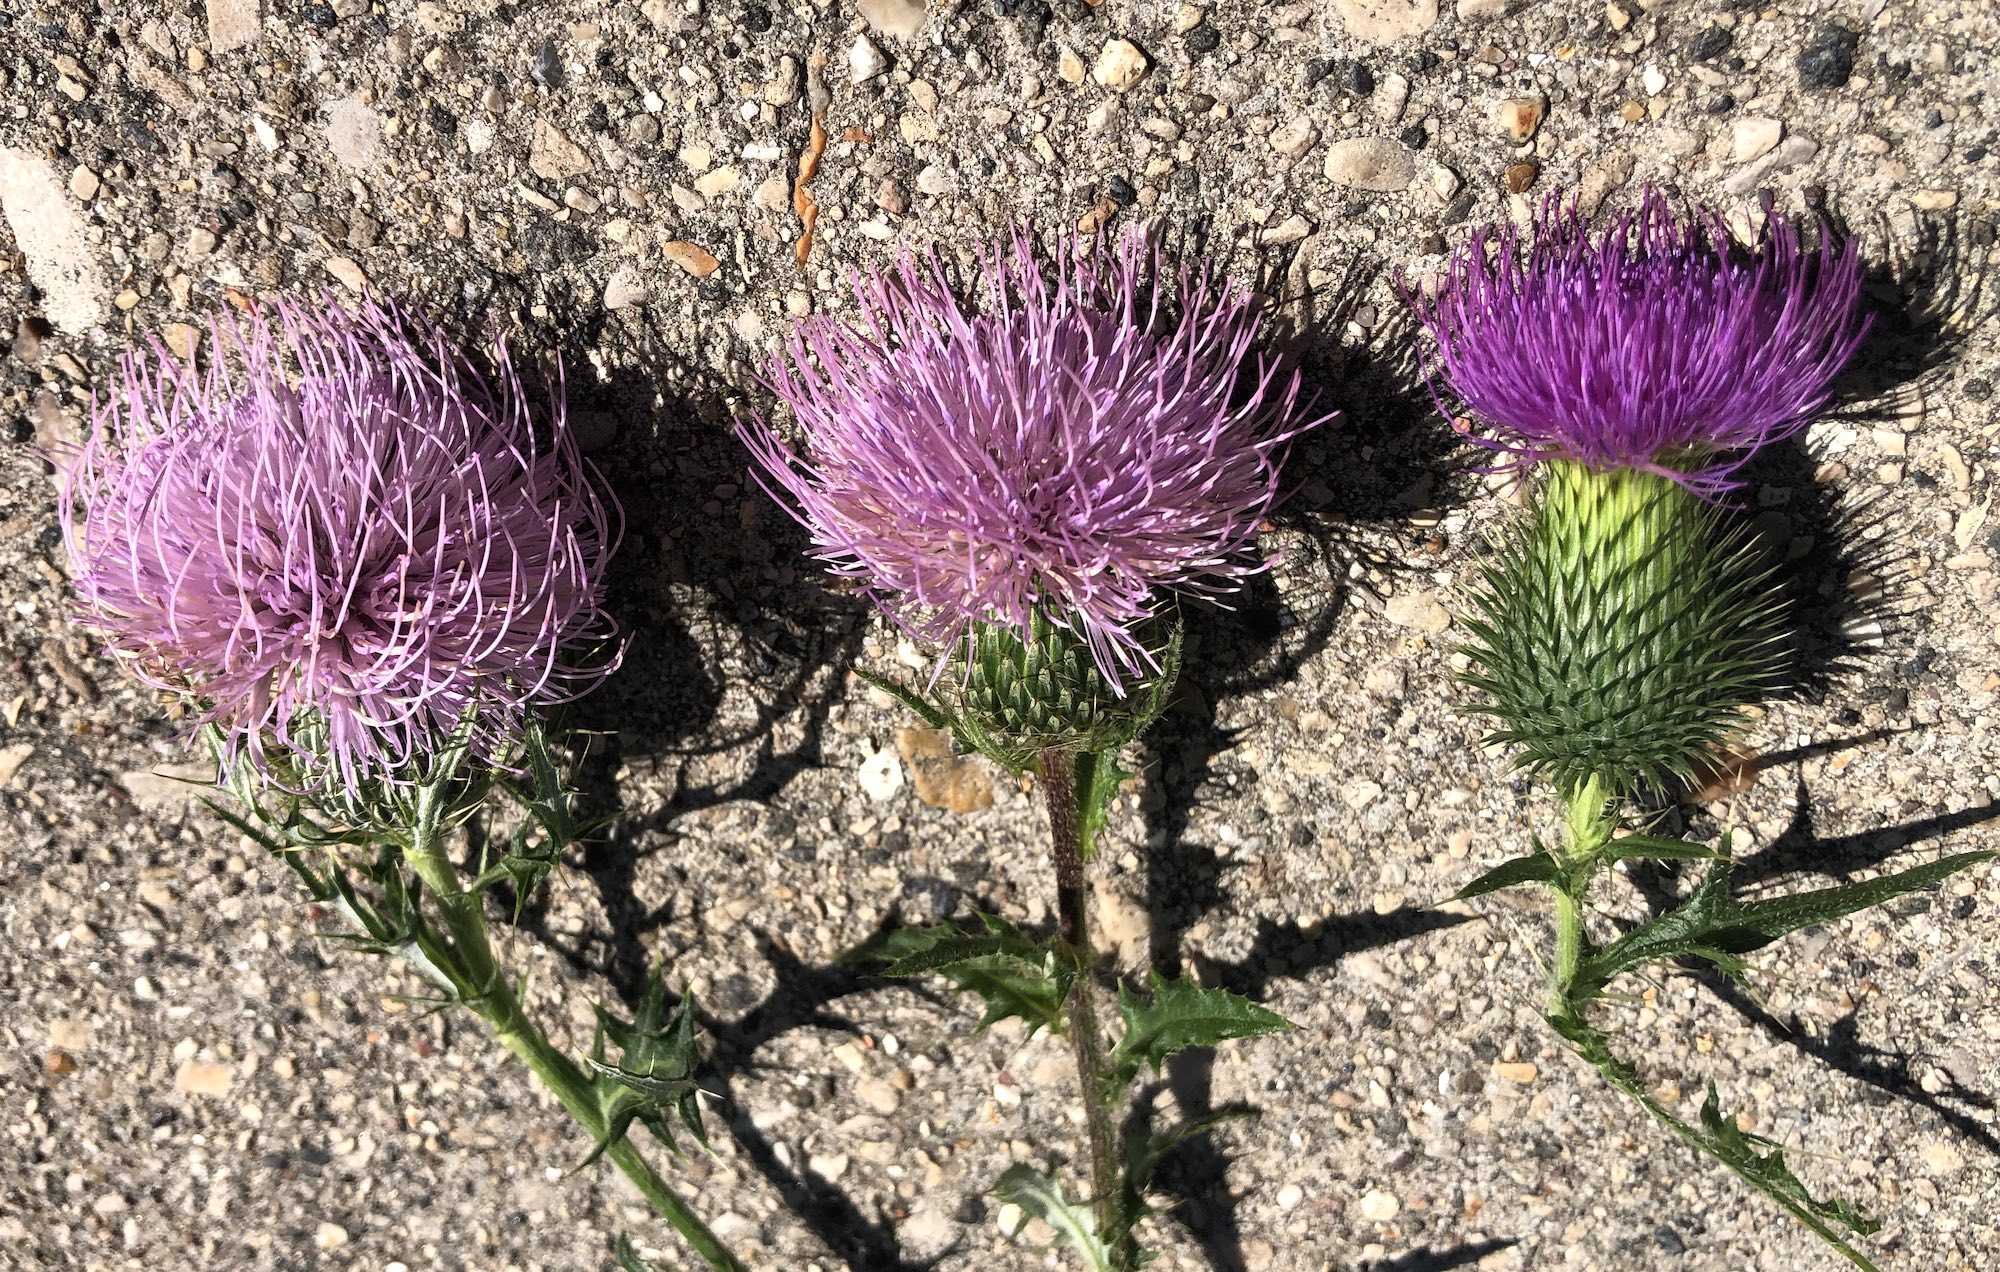 Comparison of Field thistle, Tall Thistle and Bull Thistle flowers. Field Thistle flower on left,  Tall Thistle flower in middle and Bull Thistle flower on right.